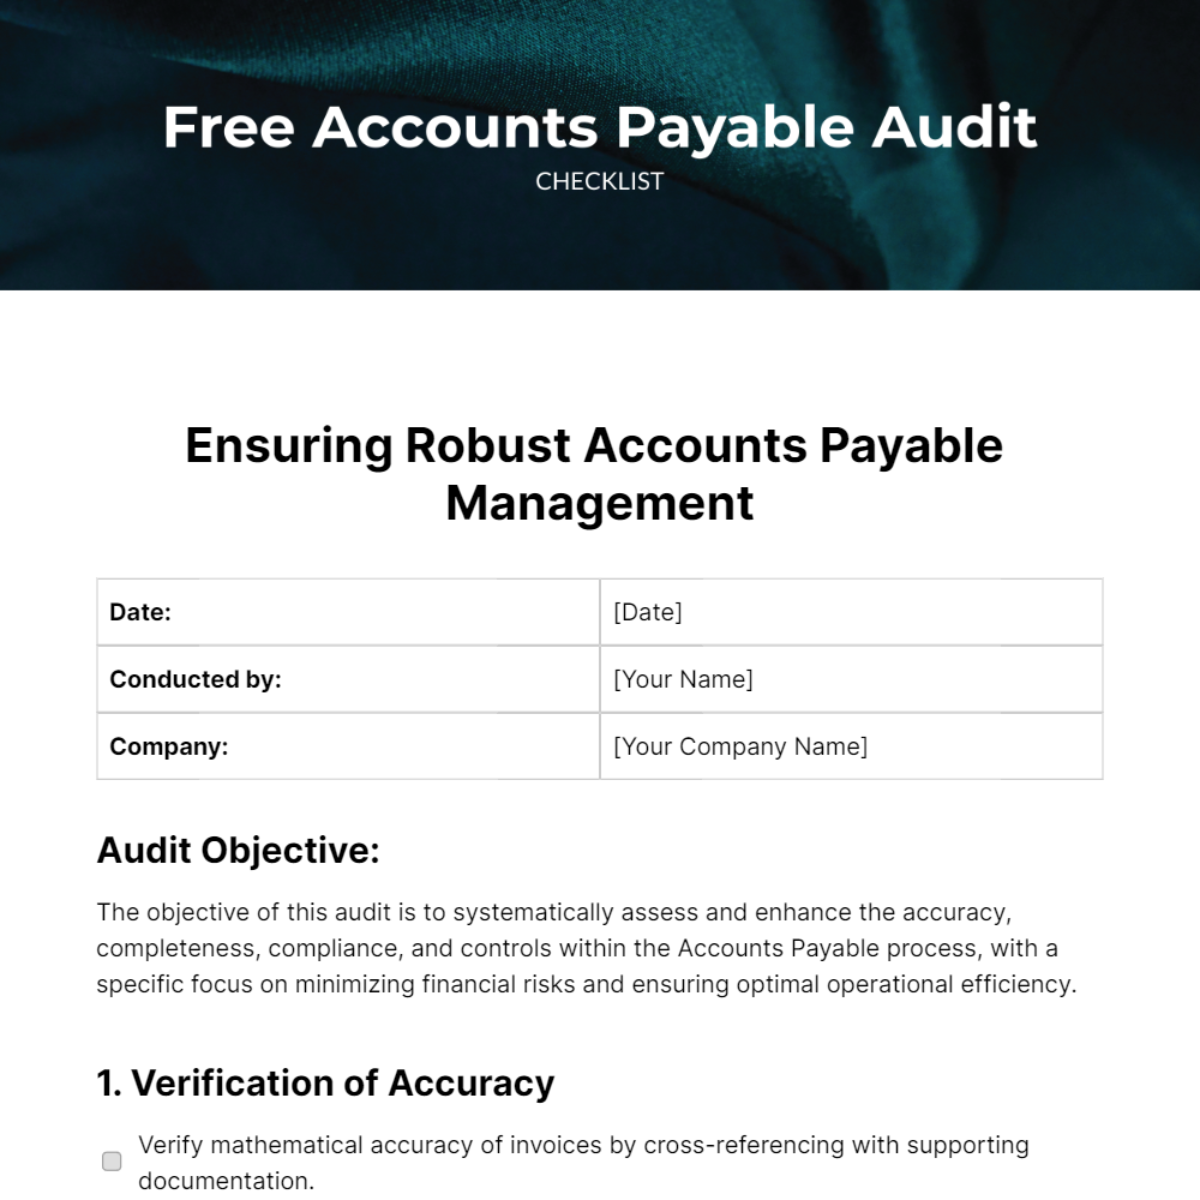 Free Accounts Payable Audit Checklist Template